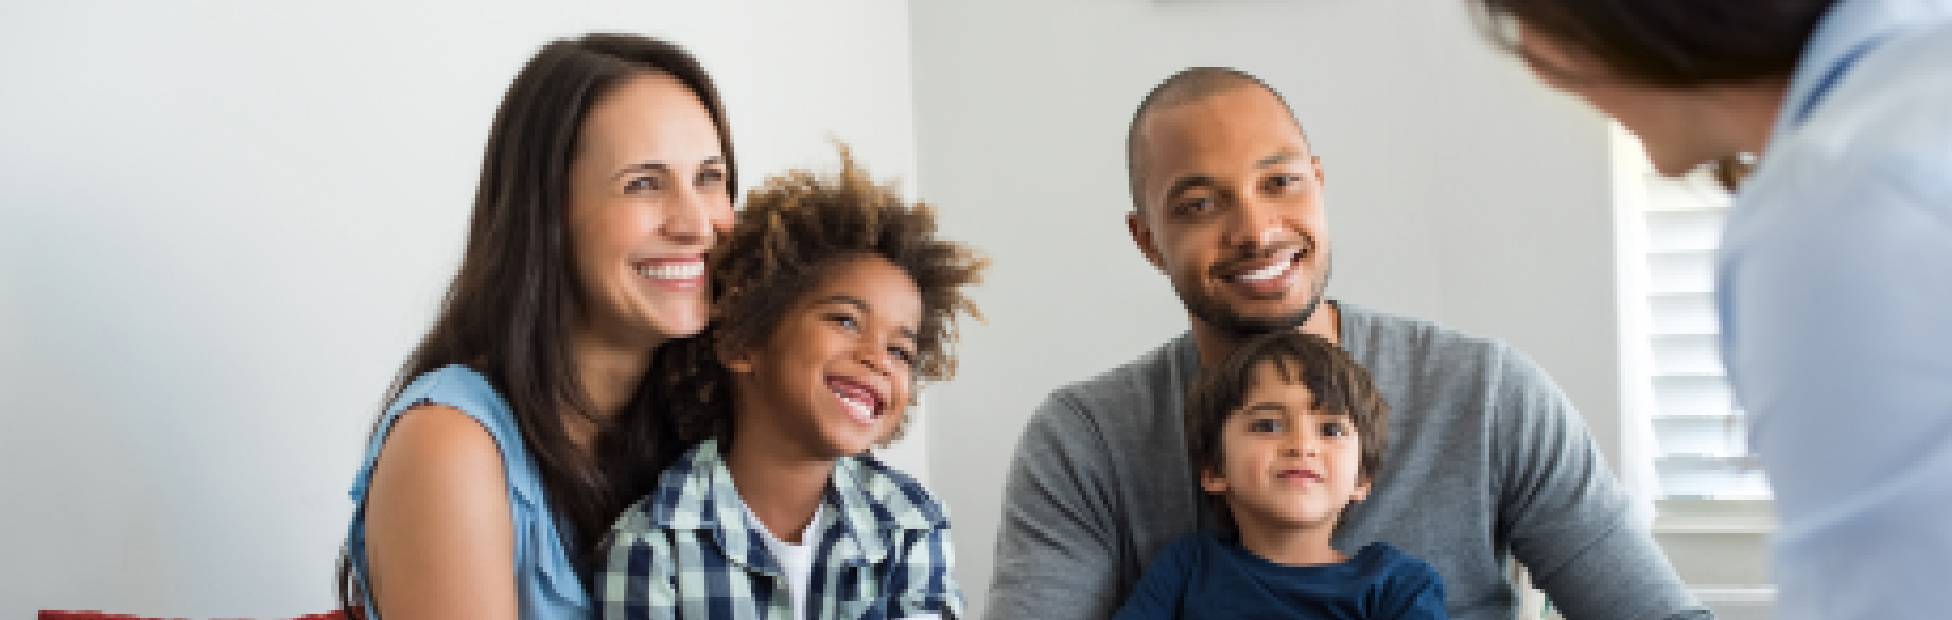 A young family of four with two sons sitting on a white couch, smiling while a mortgage specialist discusses moving mortgages for their home